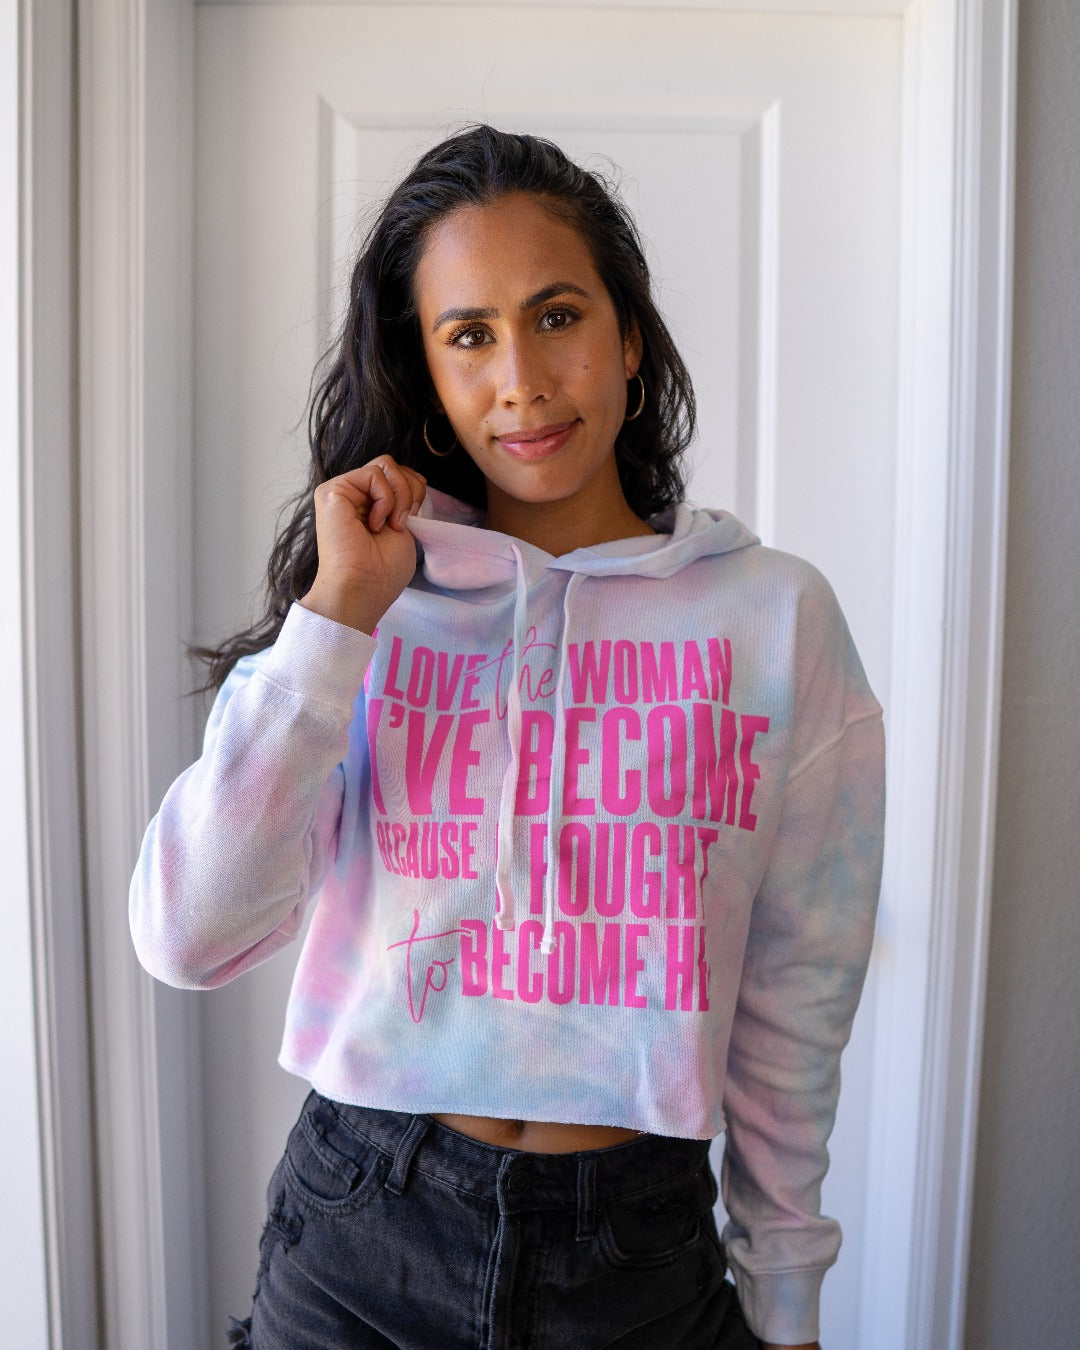 I Love The Women I Have Become Because I Fought To Become Her - Women’s Lightweight Cropped Hooded Sweatshirt-clothing and culture-shop here at-A Perfect Shirt